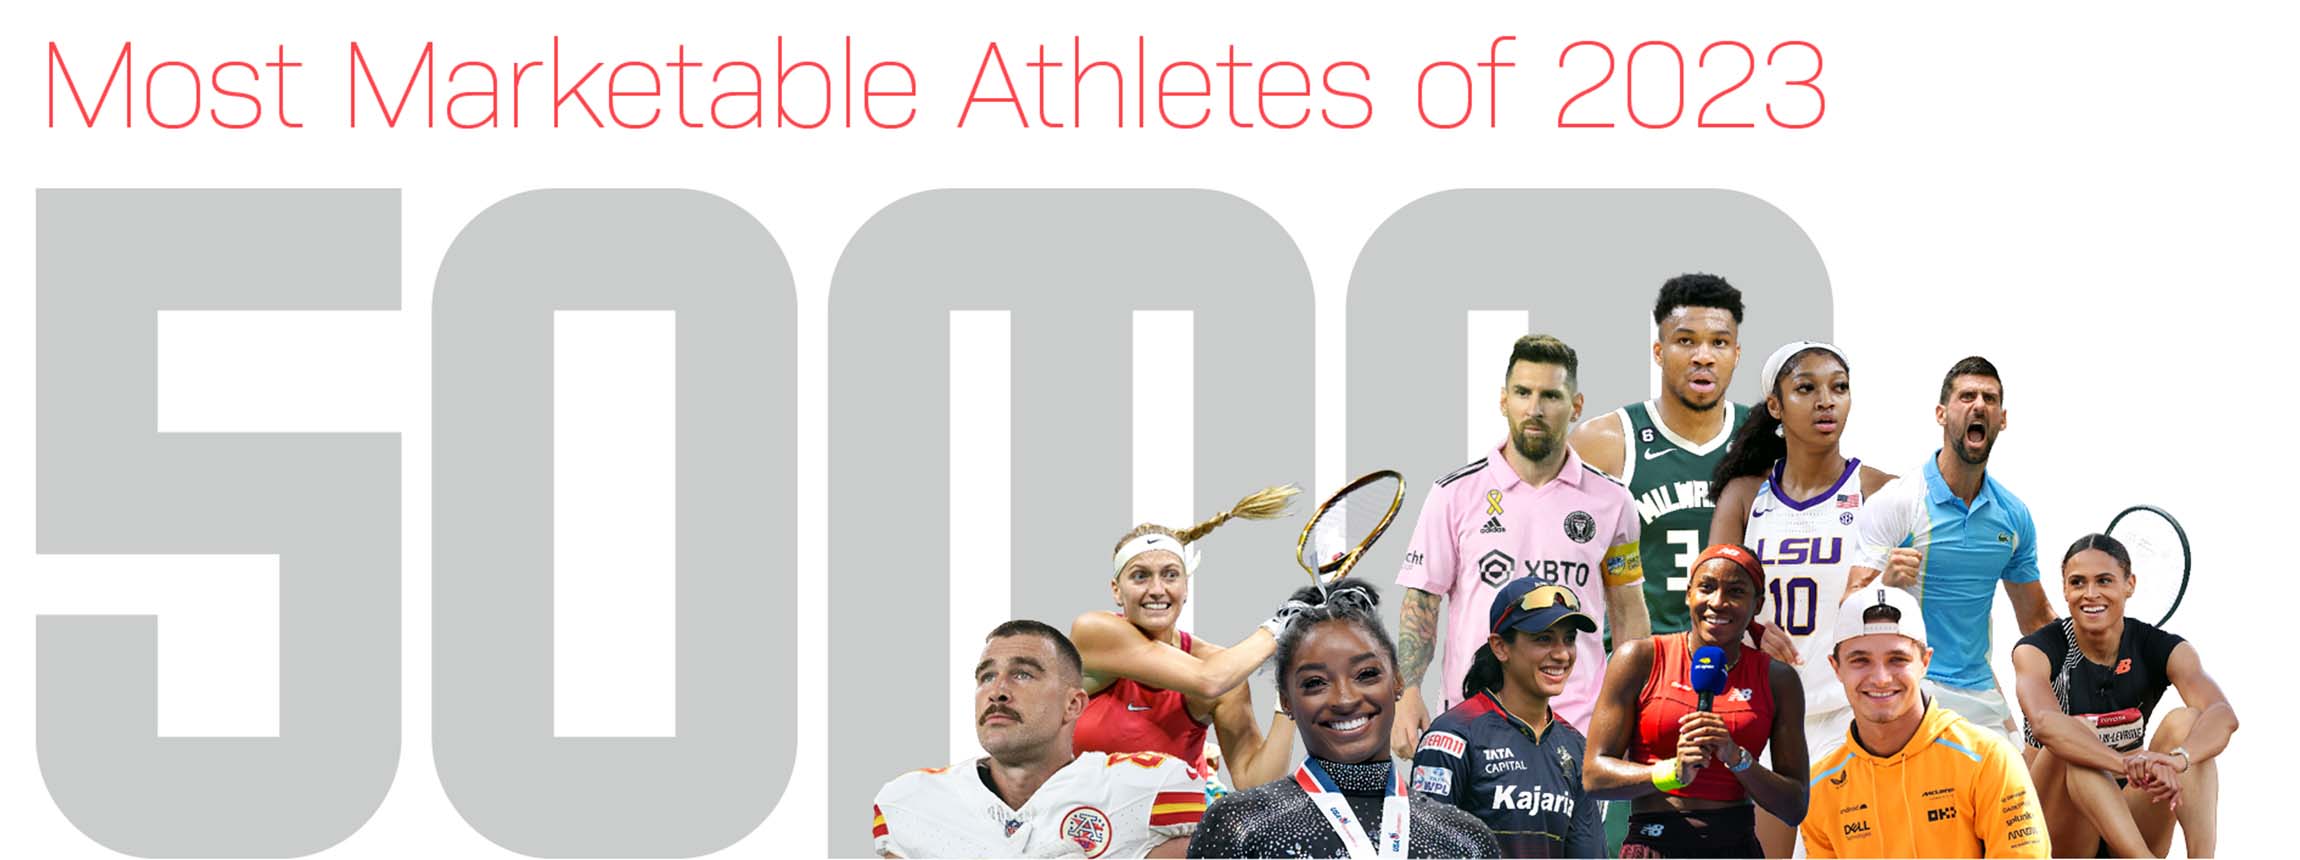 most marketable sports athletes 2023 graphic